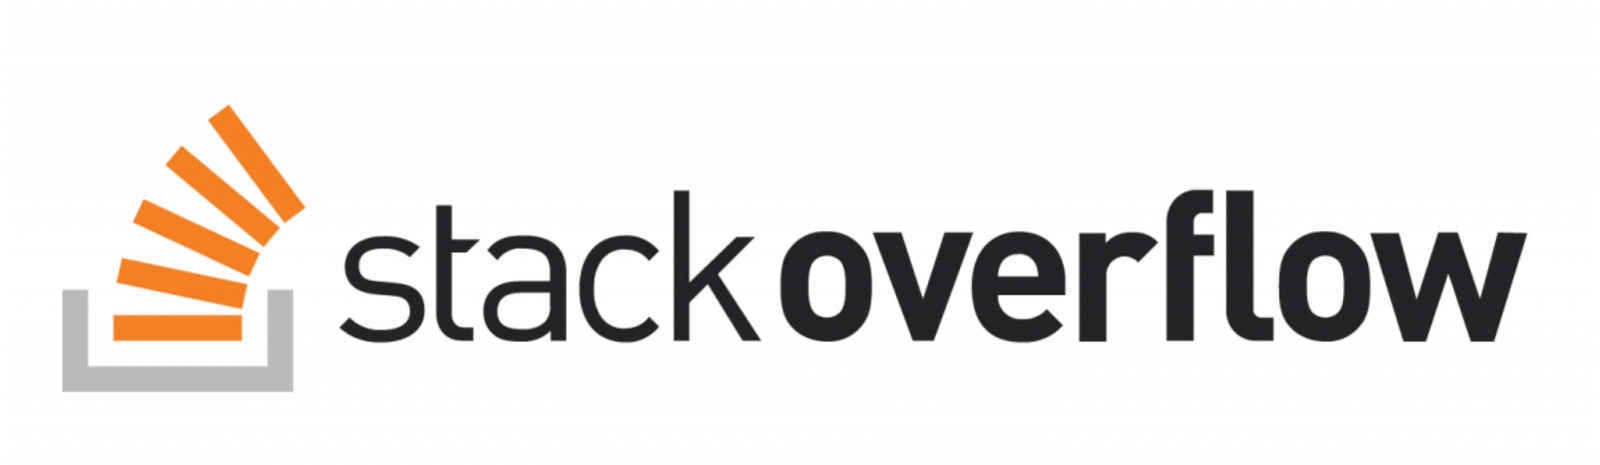 Best Web Development Answers on StackOverflow - October, 2015